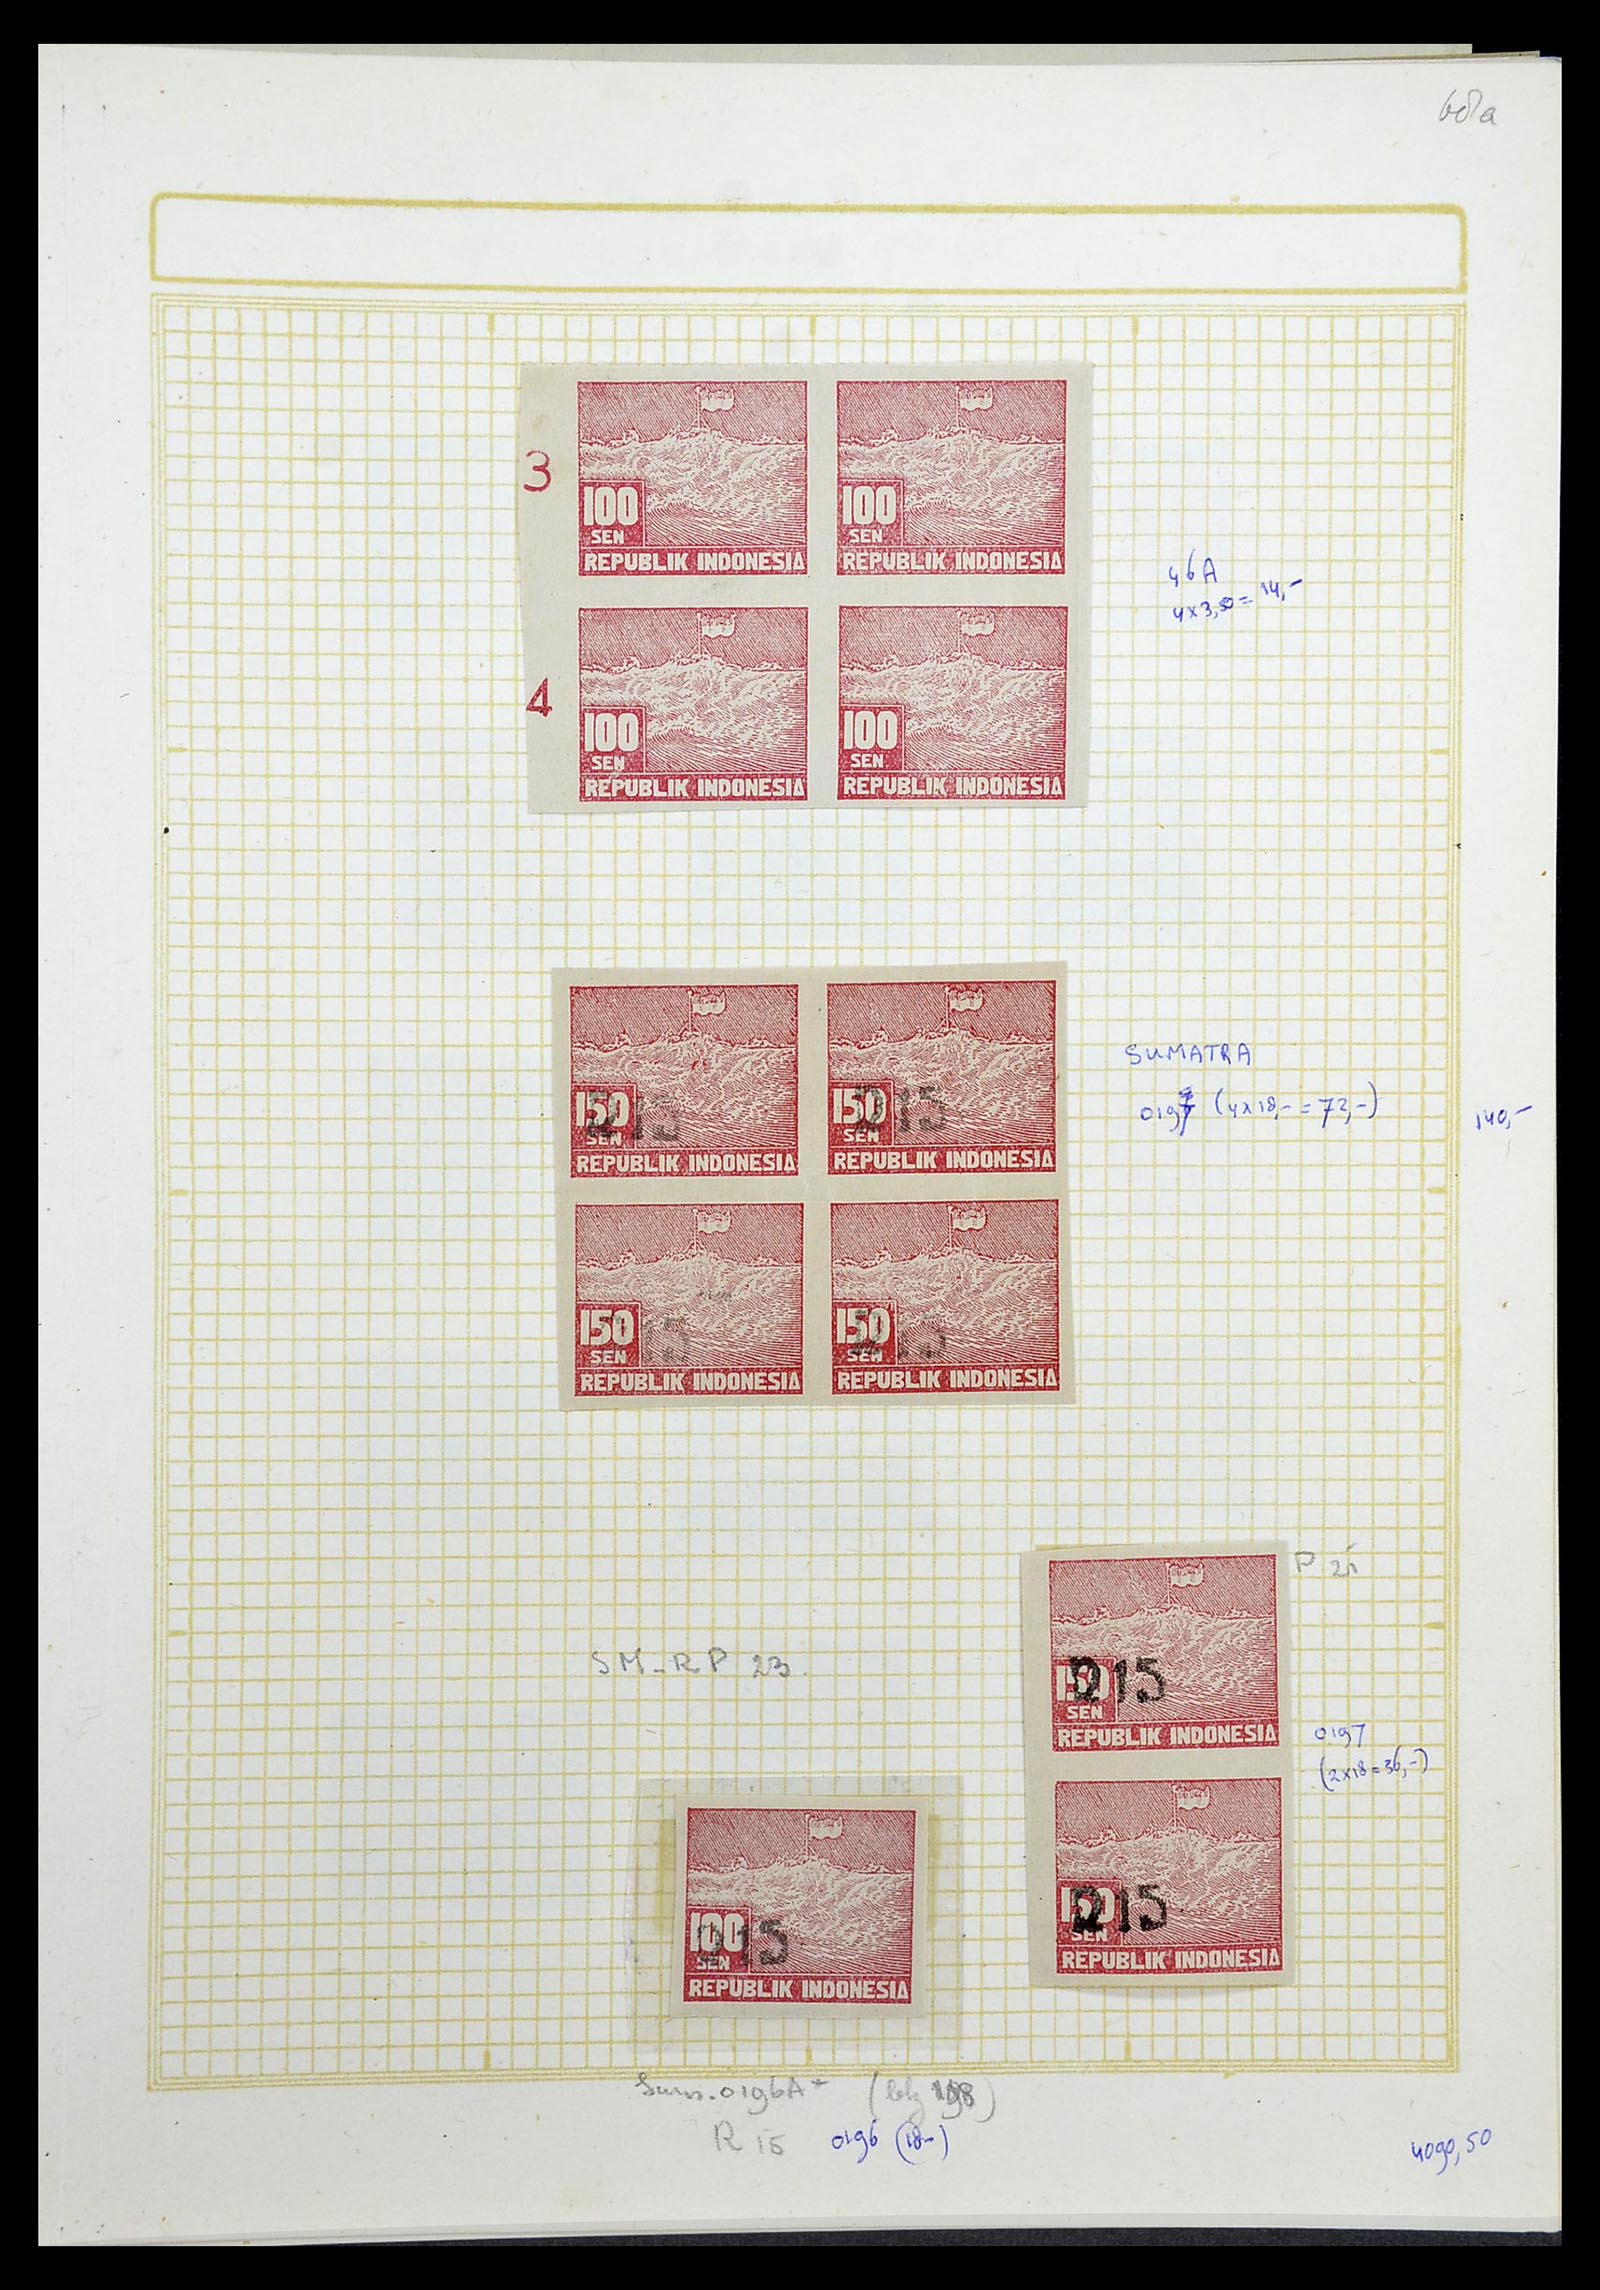 34545 172 - Stamp Collection 34545 Japanese Occupation of the Dutch East Indies and 